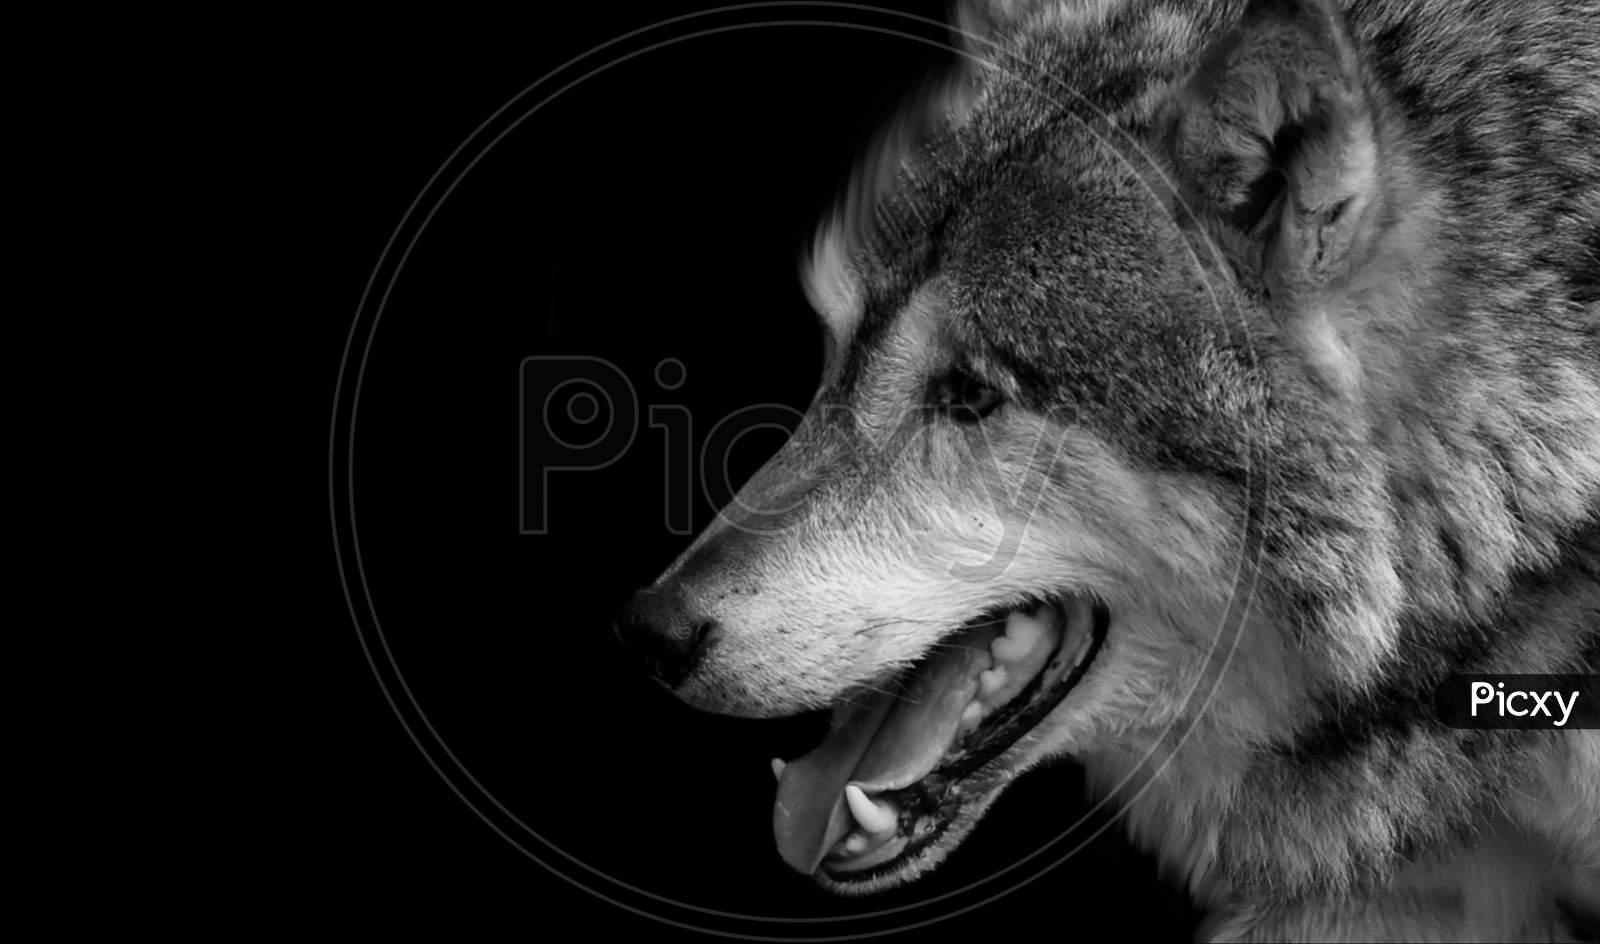 Black And White Eurasian Wolf In The Black Background